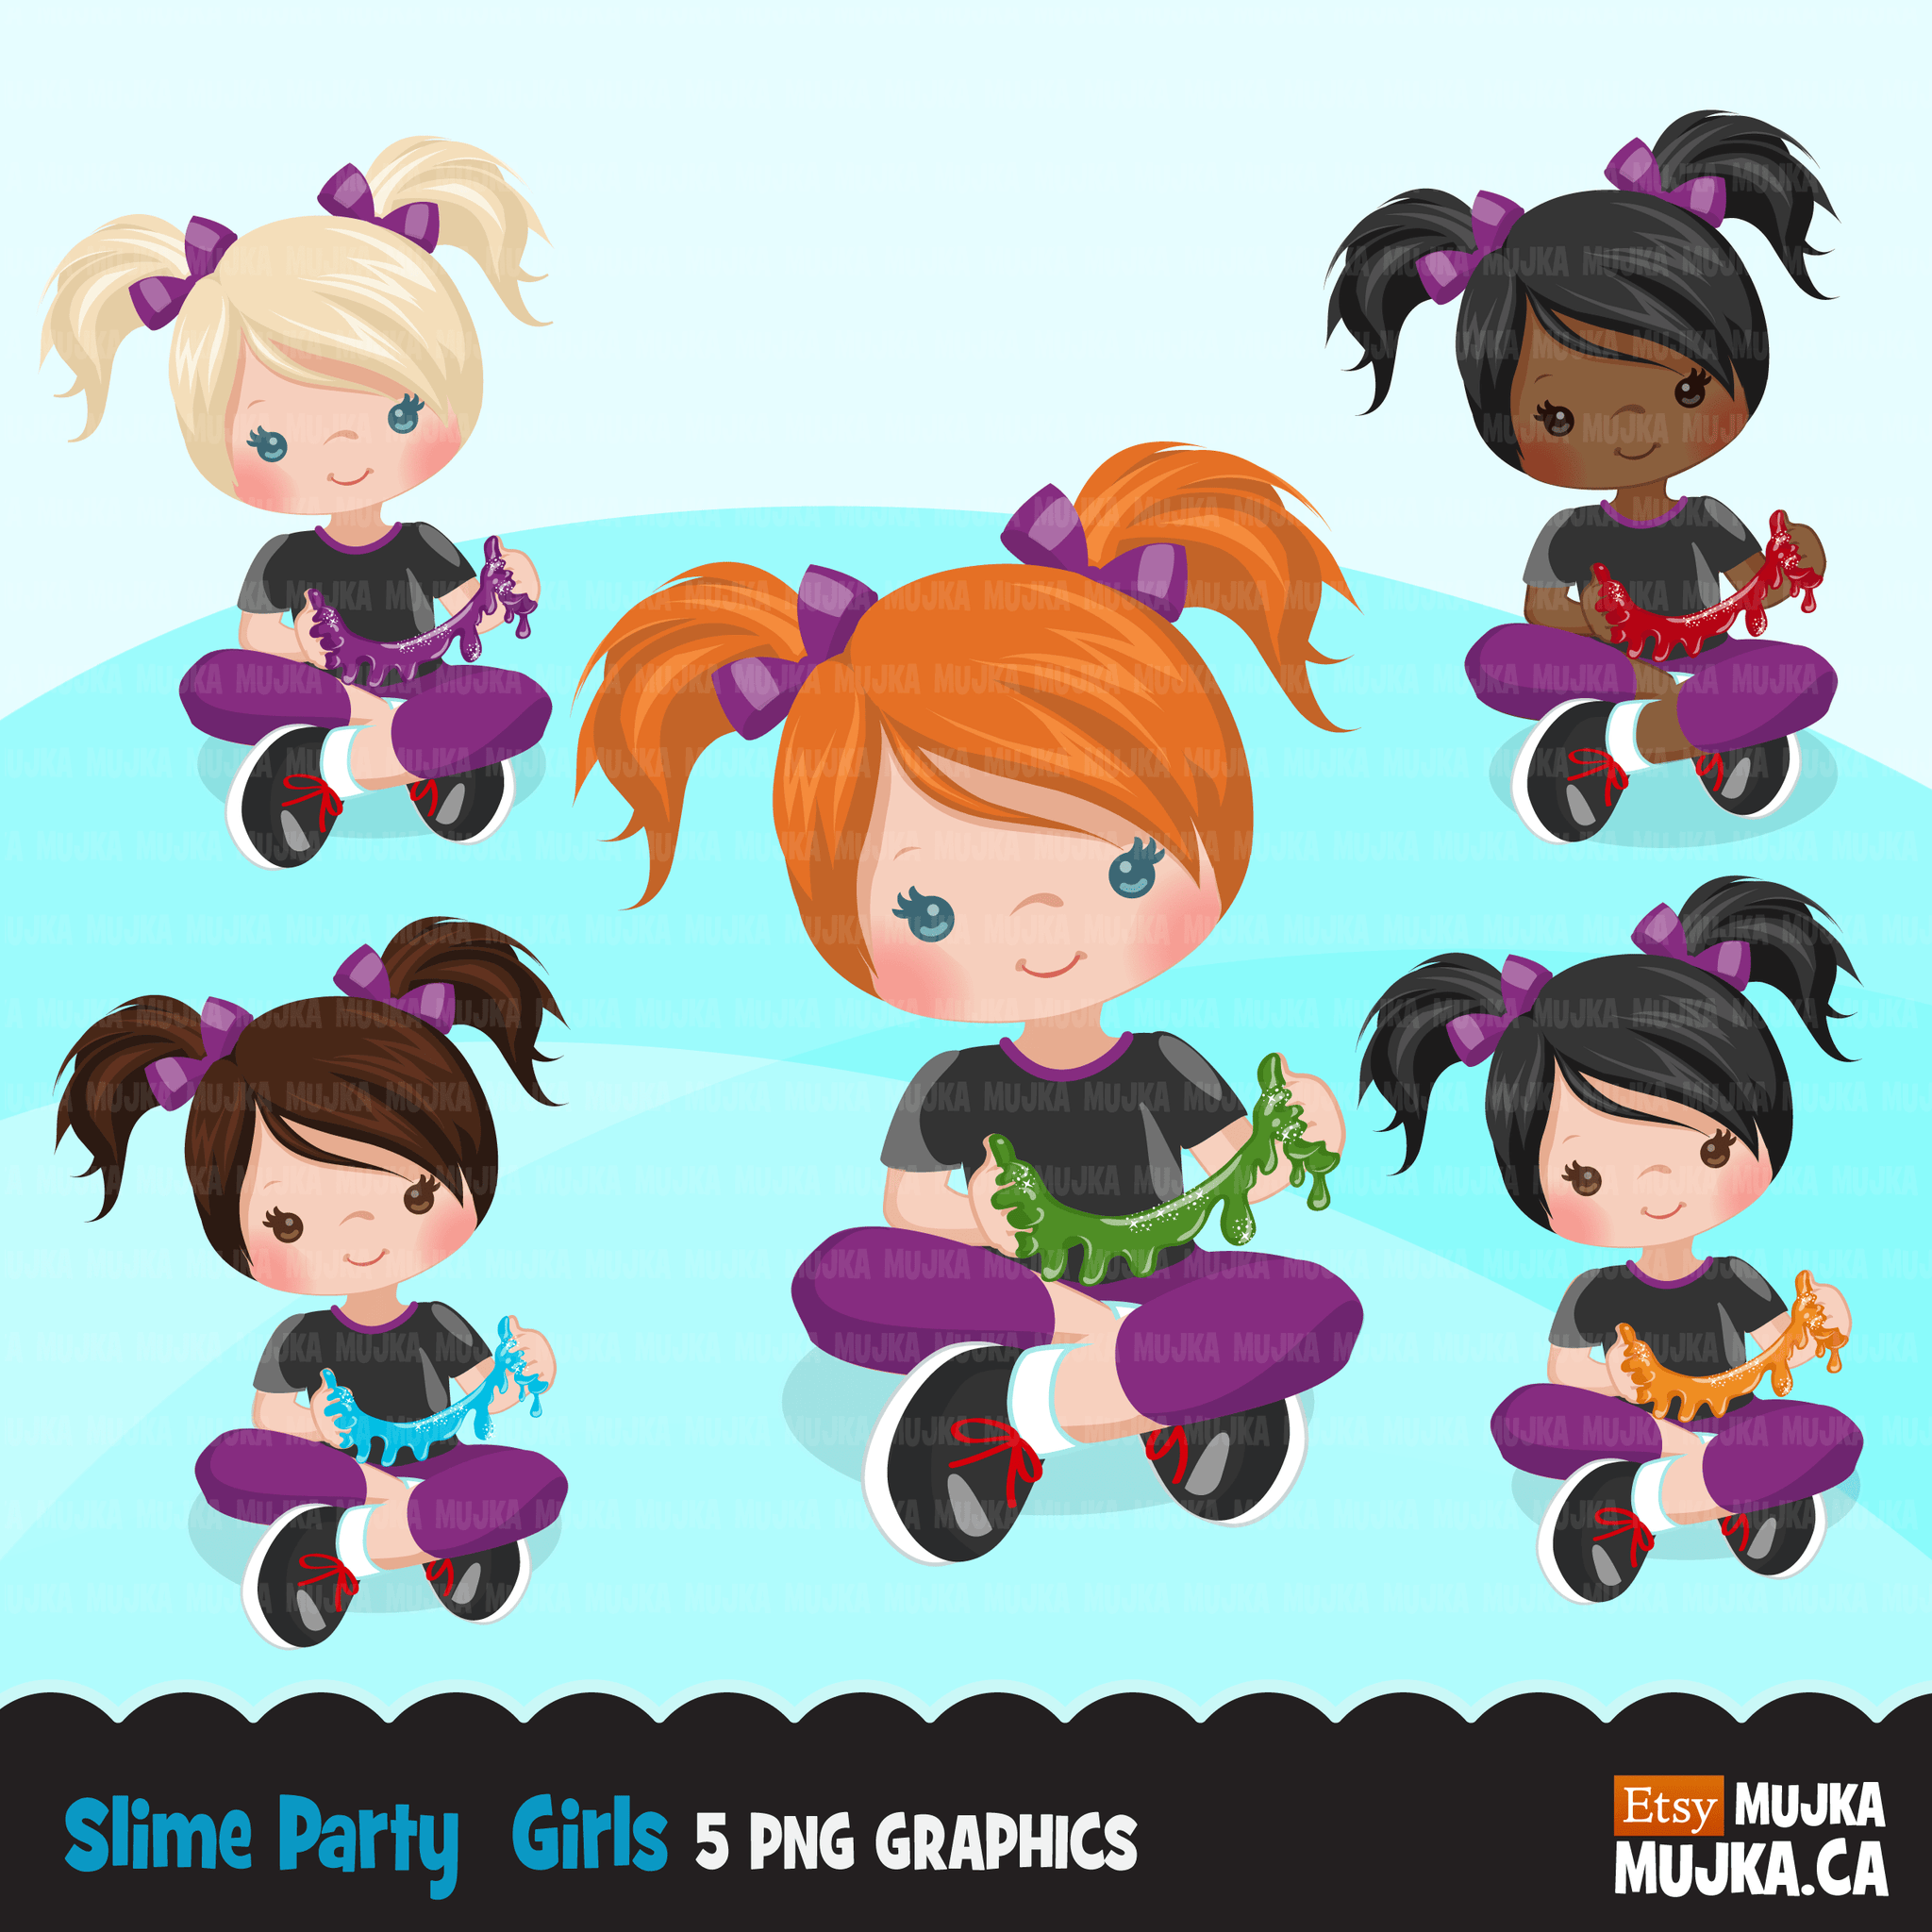 Slime Party clipart Bundle. Collection of cute slime elements, colorful dripping splashes backgrounds and boy girl characters